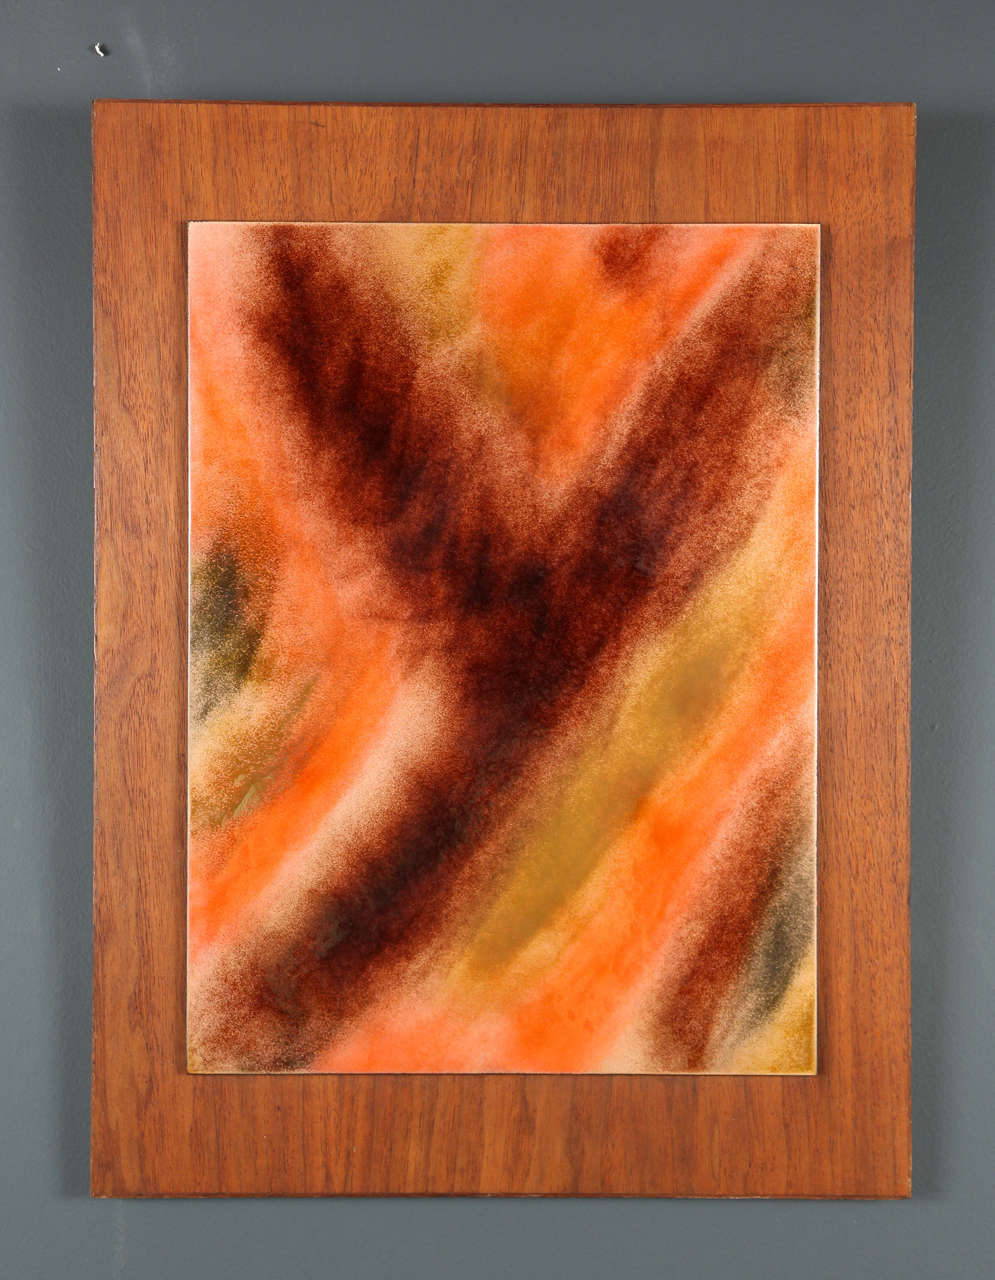 Exquisite pair of high gloss resin panels mounted on walnut wood. The two panels incorporate a mix of orange, yellow, and earth tones in a distinctive abstract pattern.